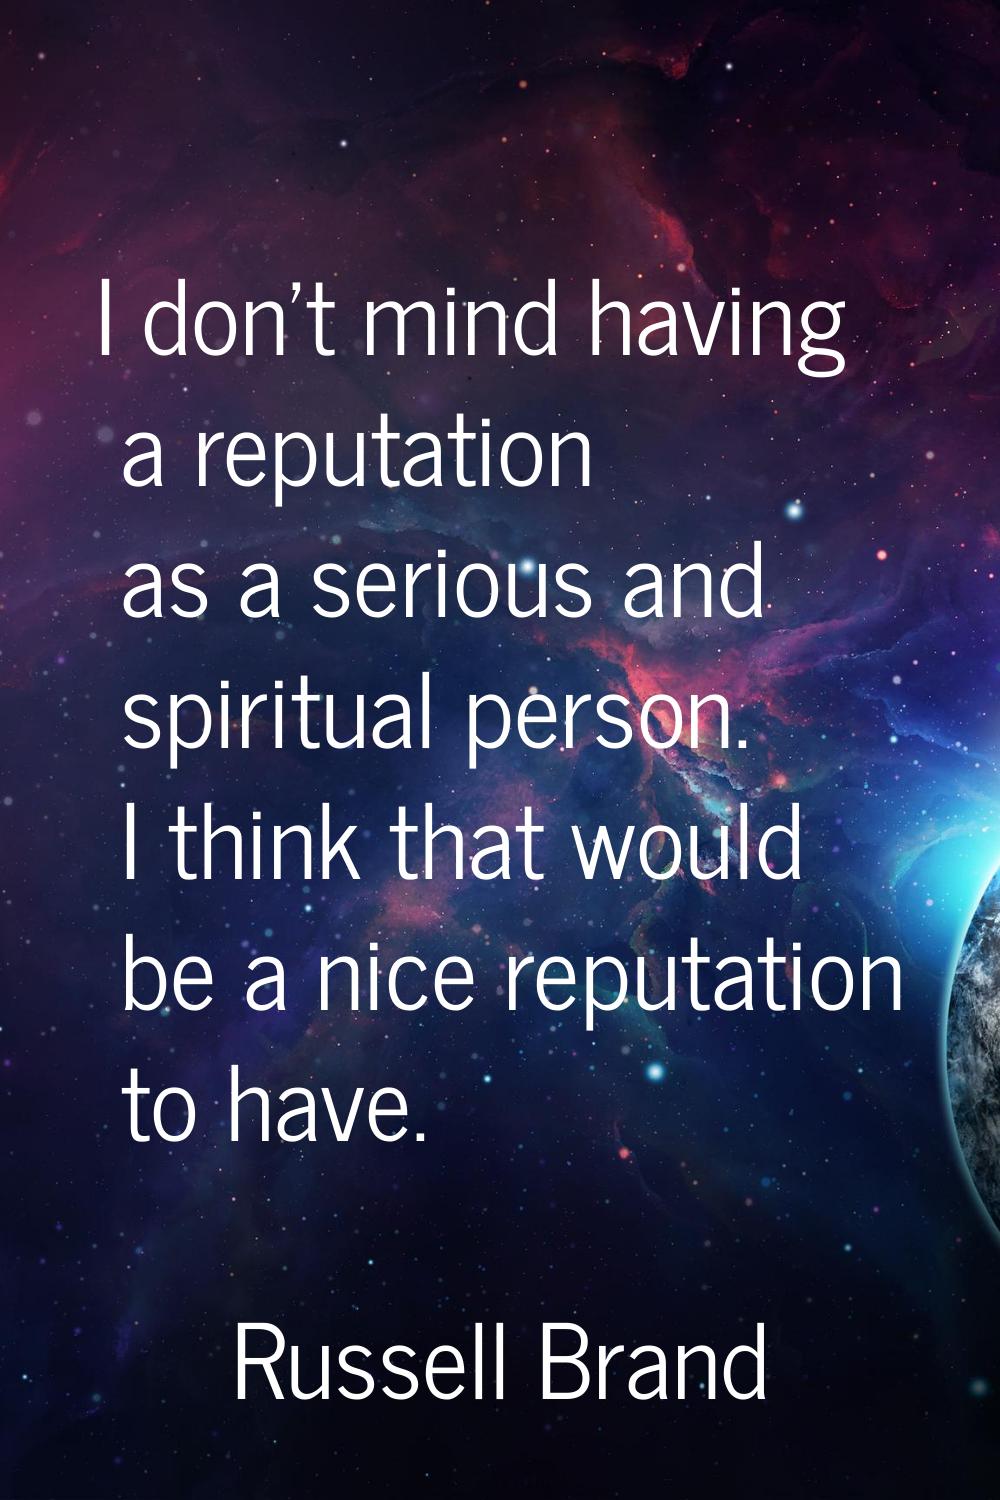 I don't mind having a reputation as a serious and spiritual person. I think that would be a nice re